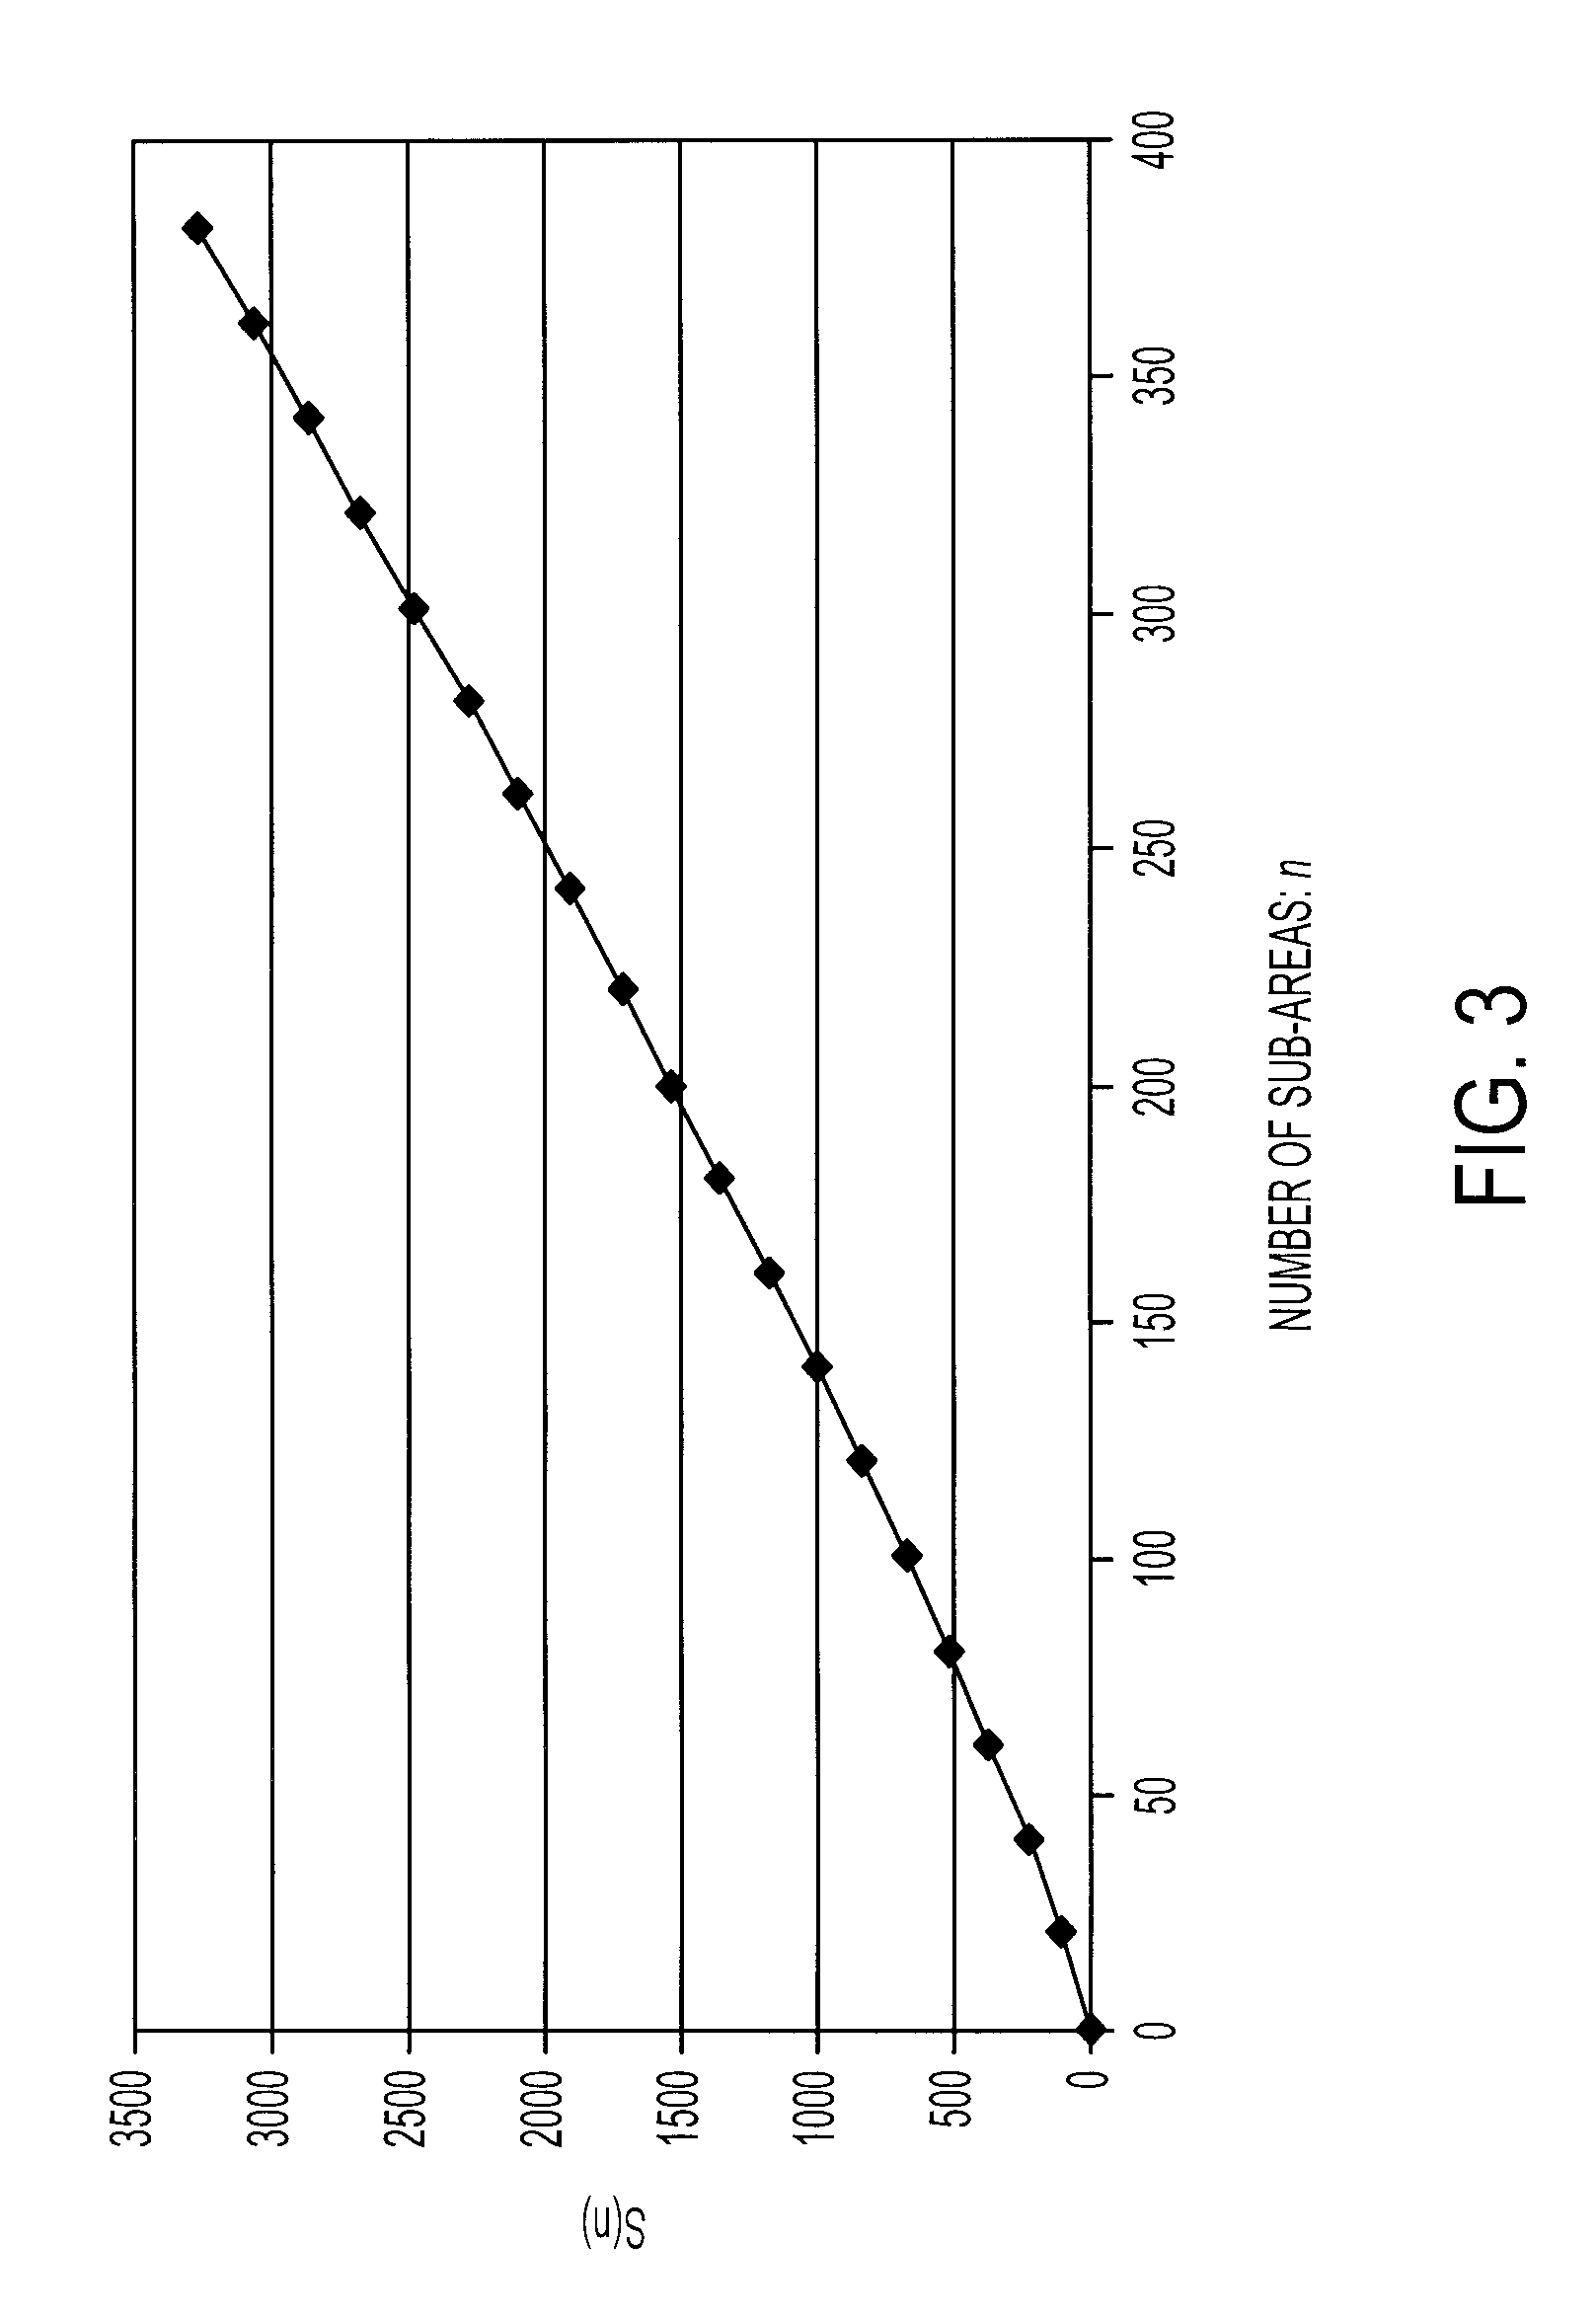 Environmental monitoring using mobile devices and network information server